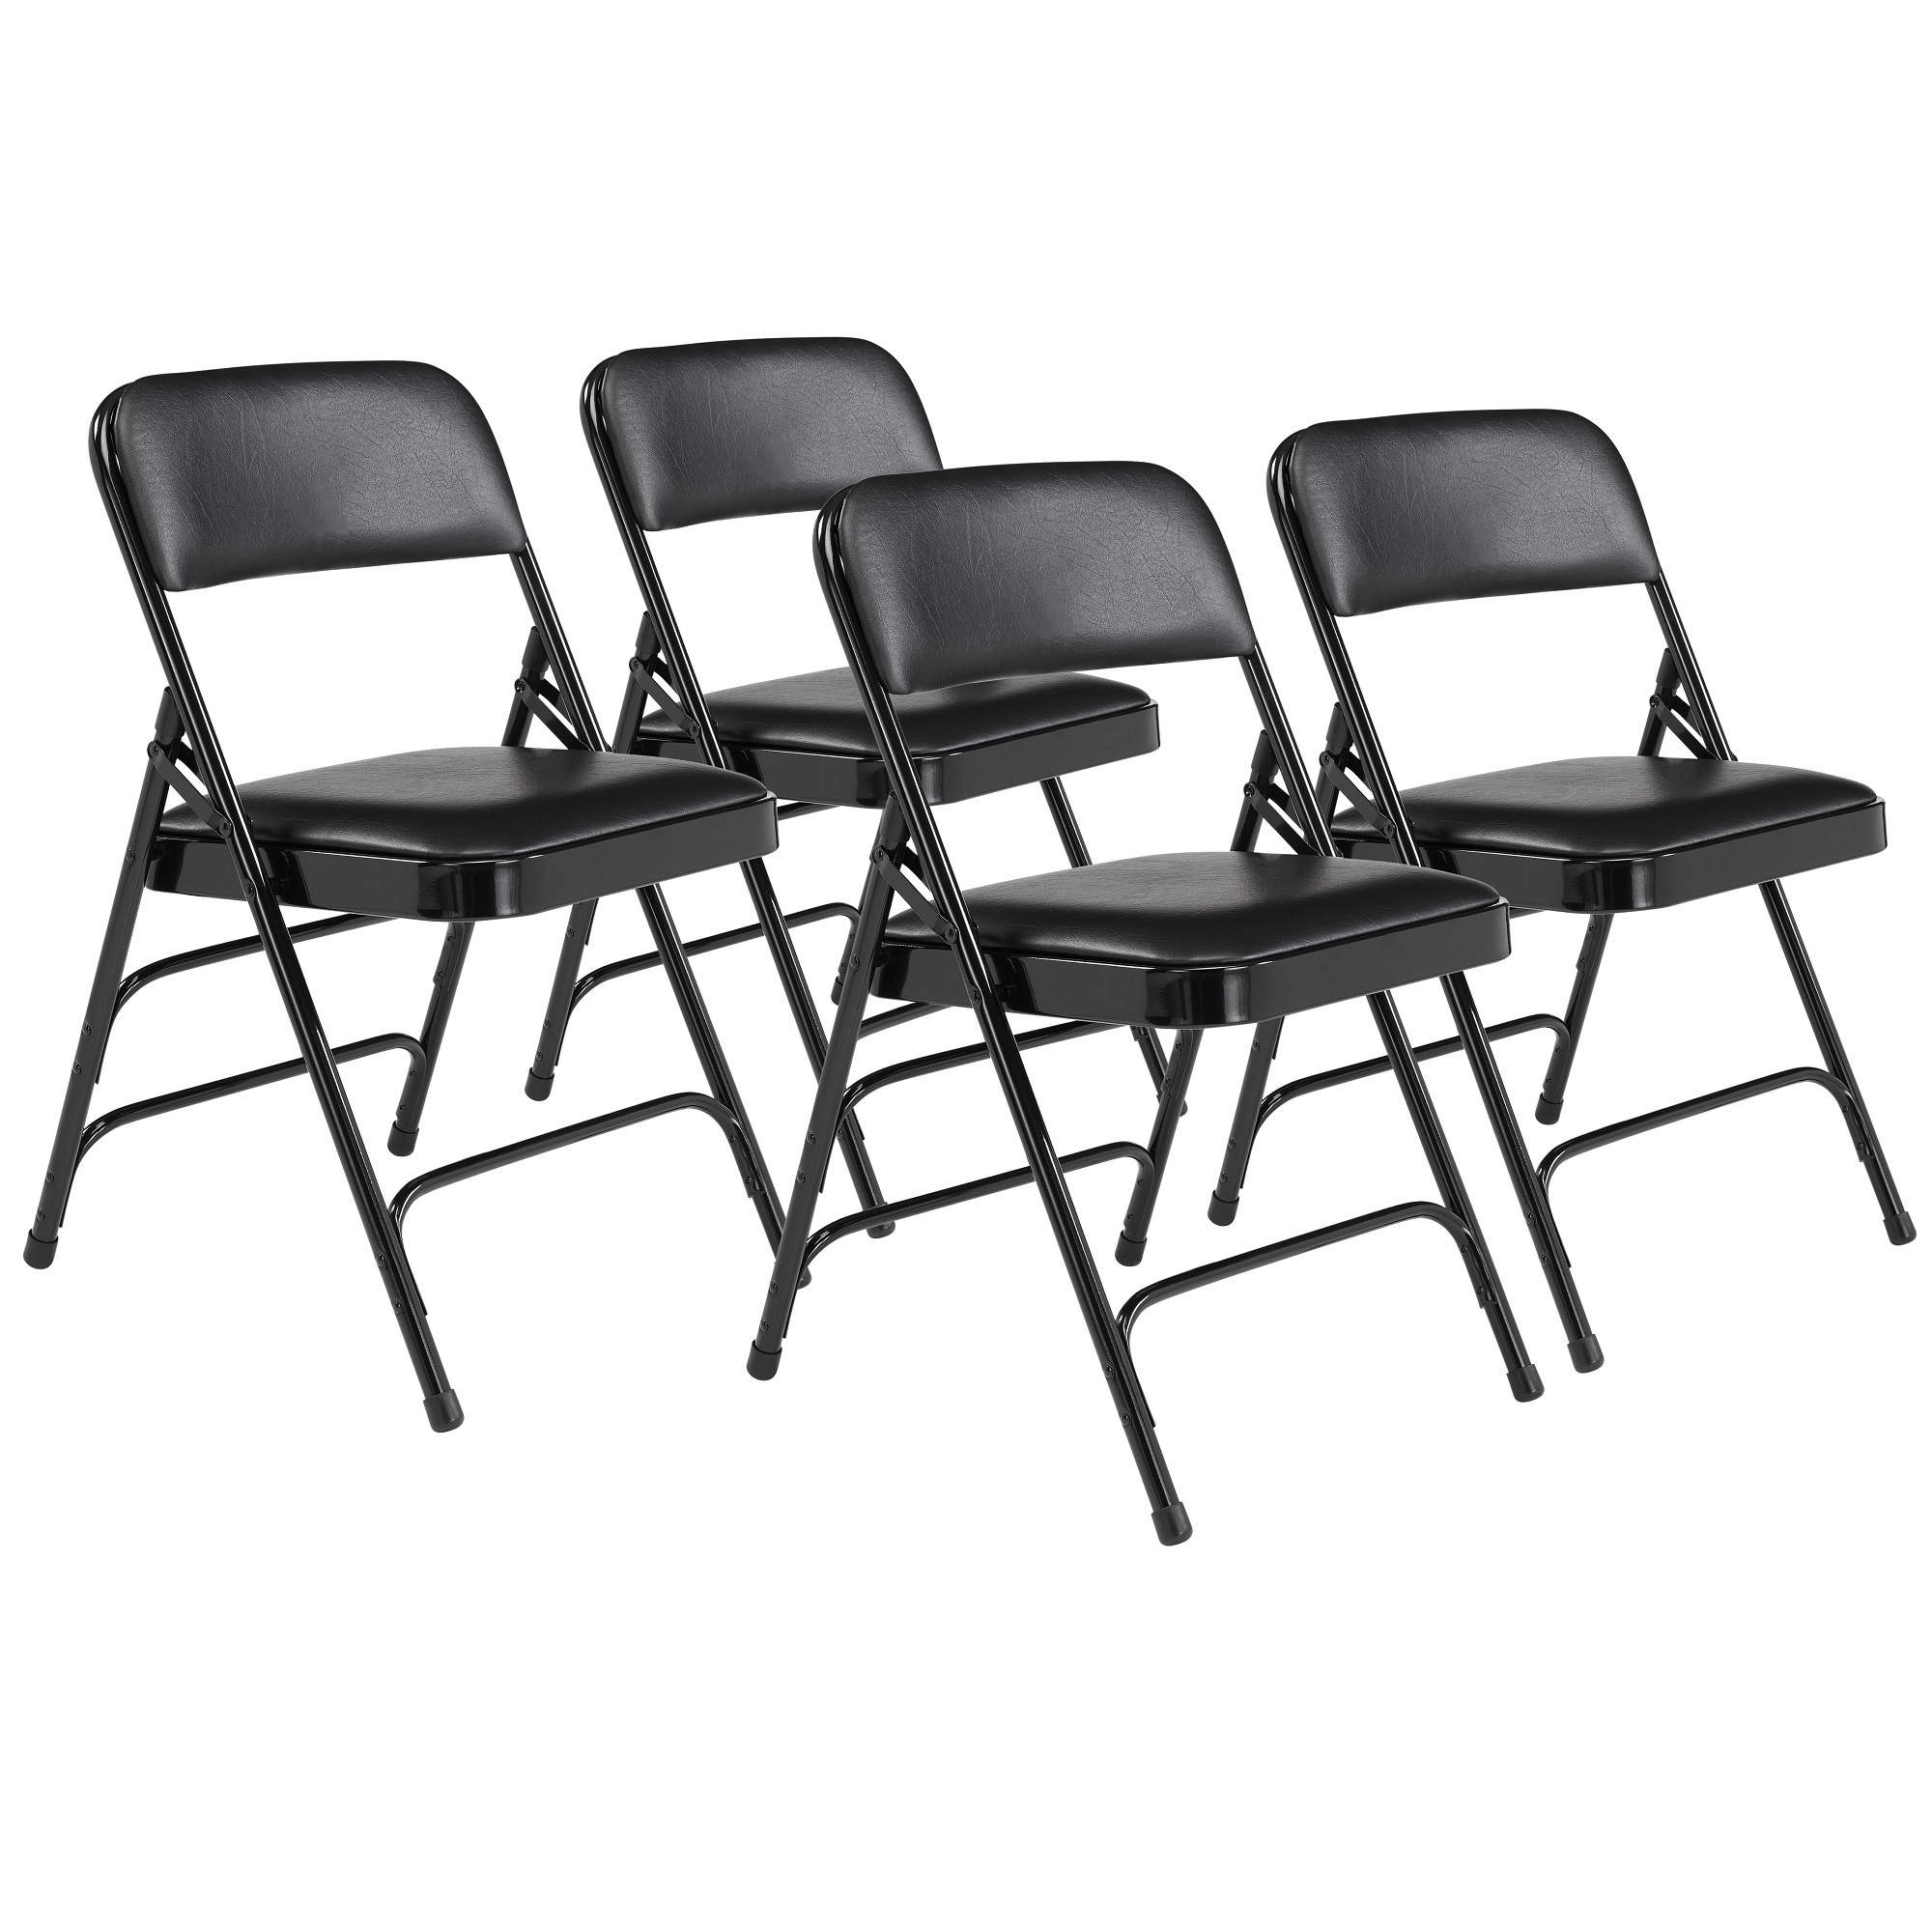 1300 Series Vinyl Upholstered Folding Chair, Primary Color Black, Included (qty.) 4, Seating Type Folding Chair, Model - National Public Seating 1310